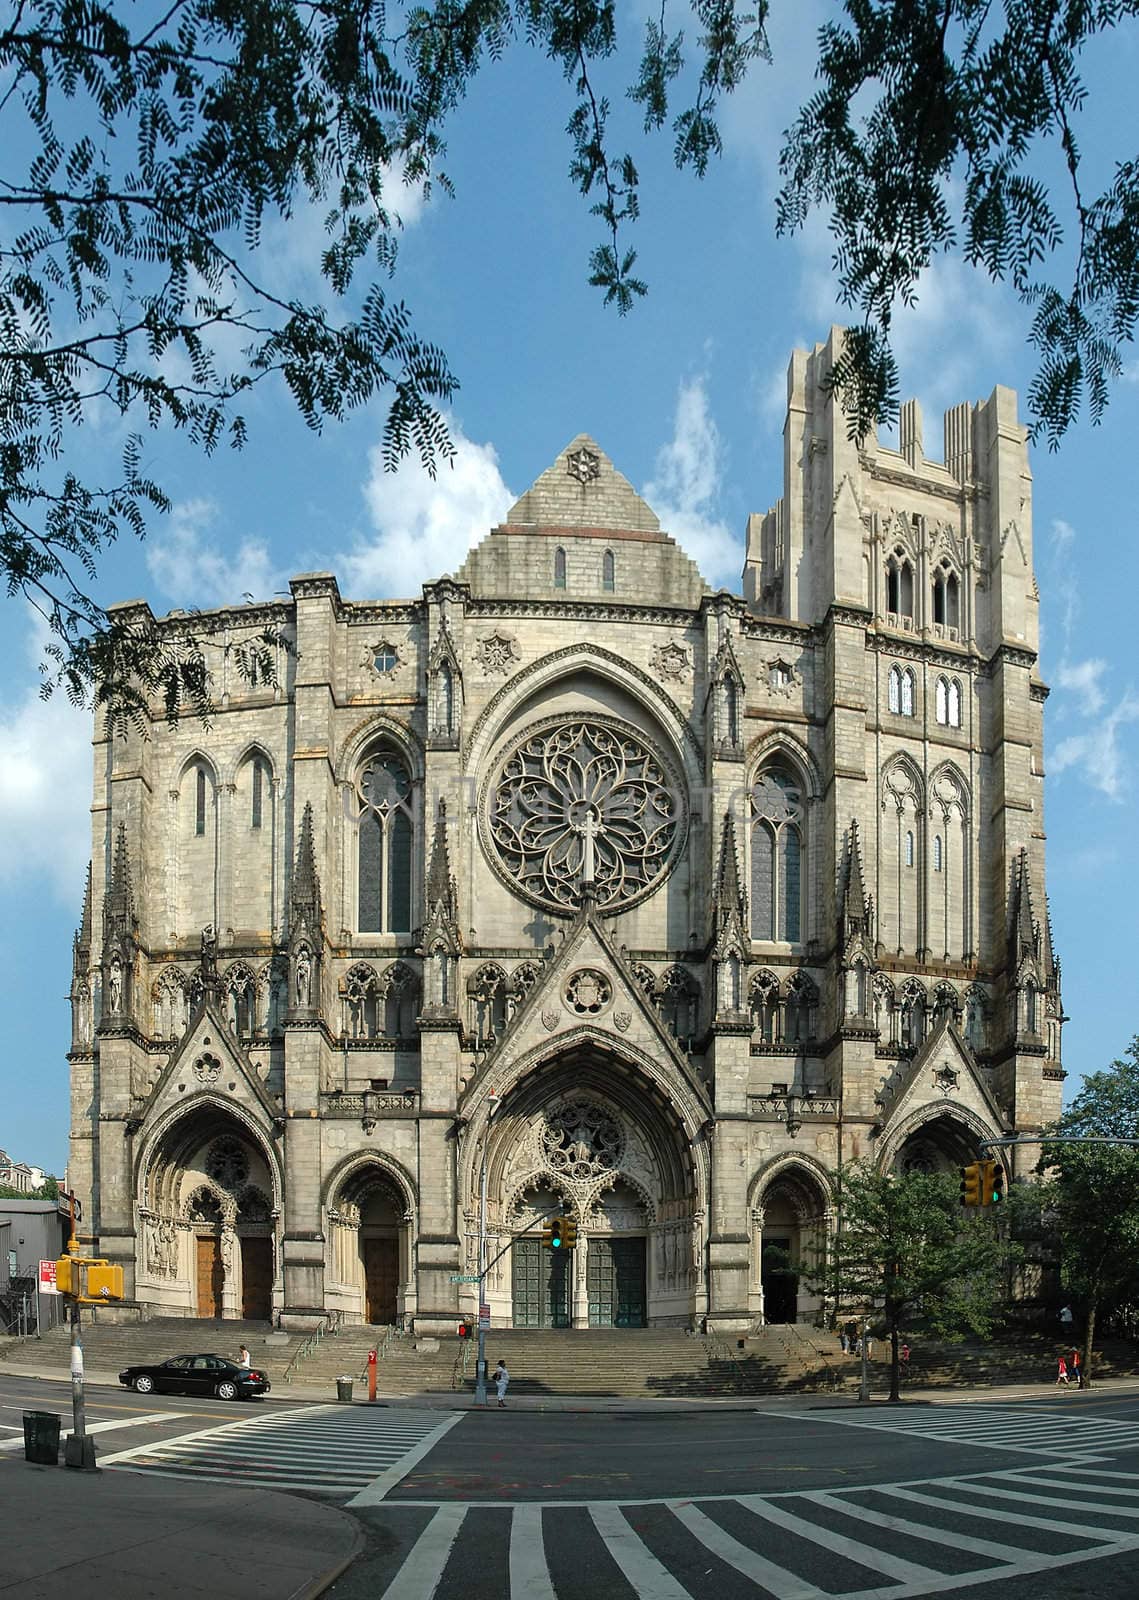 The Cathedral Church of Saint John the Divine in Manhattan, New York